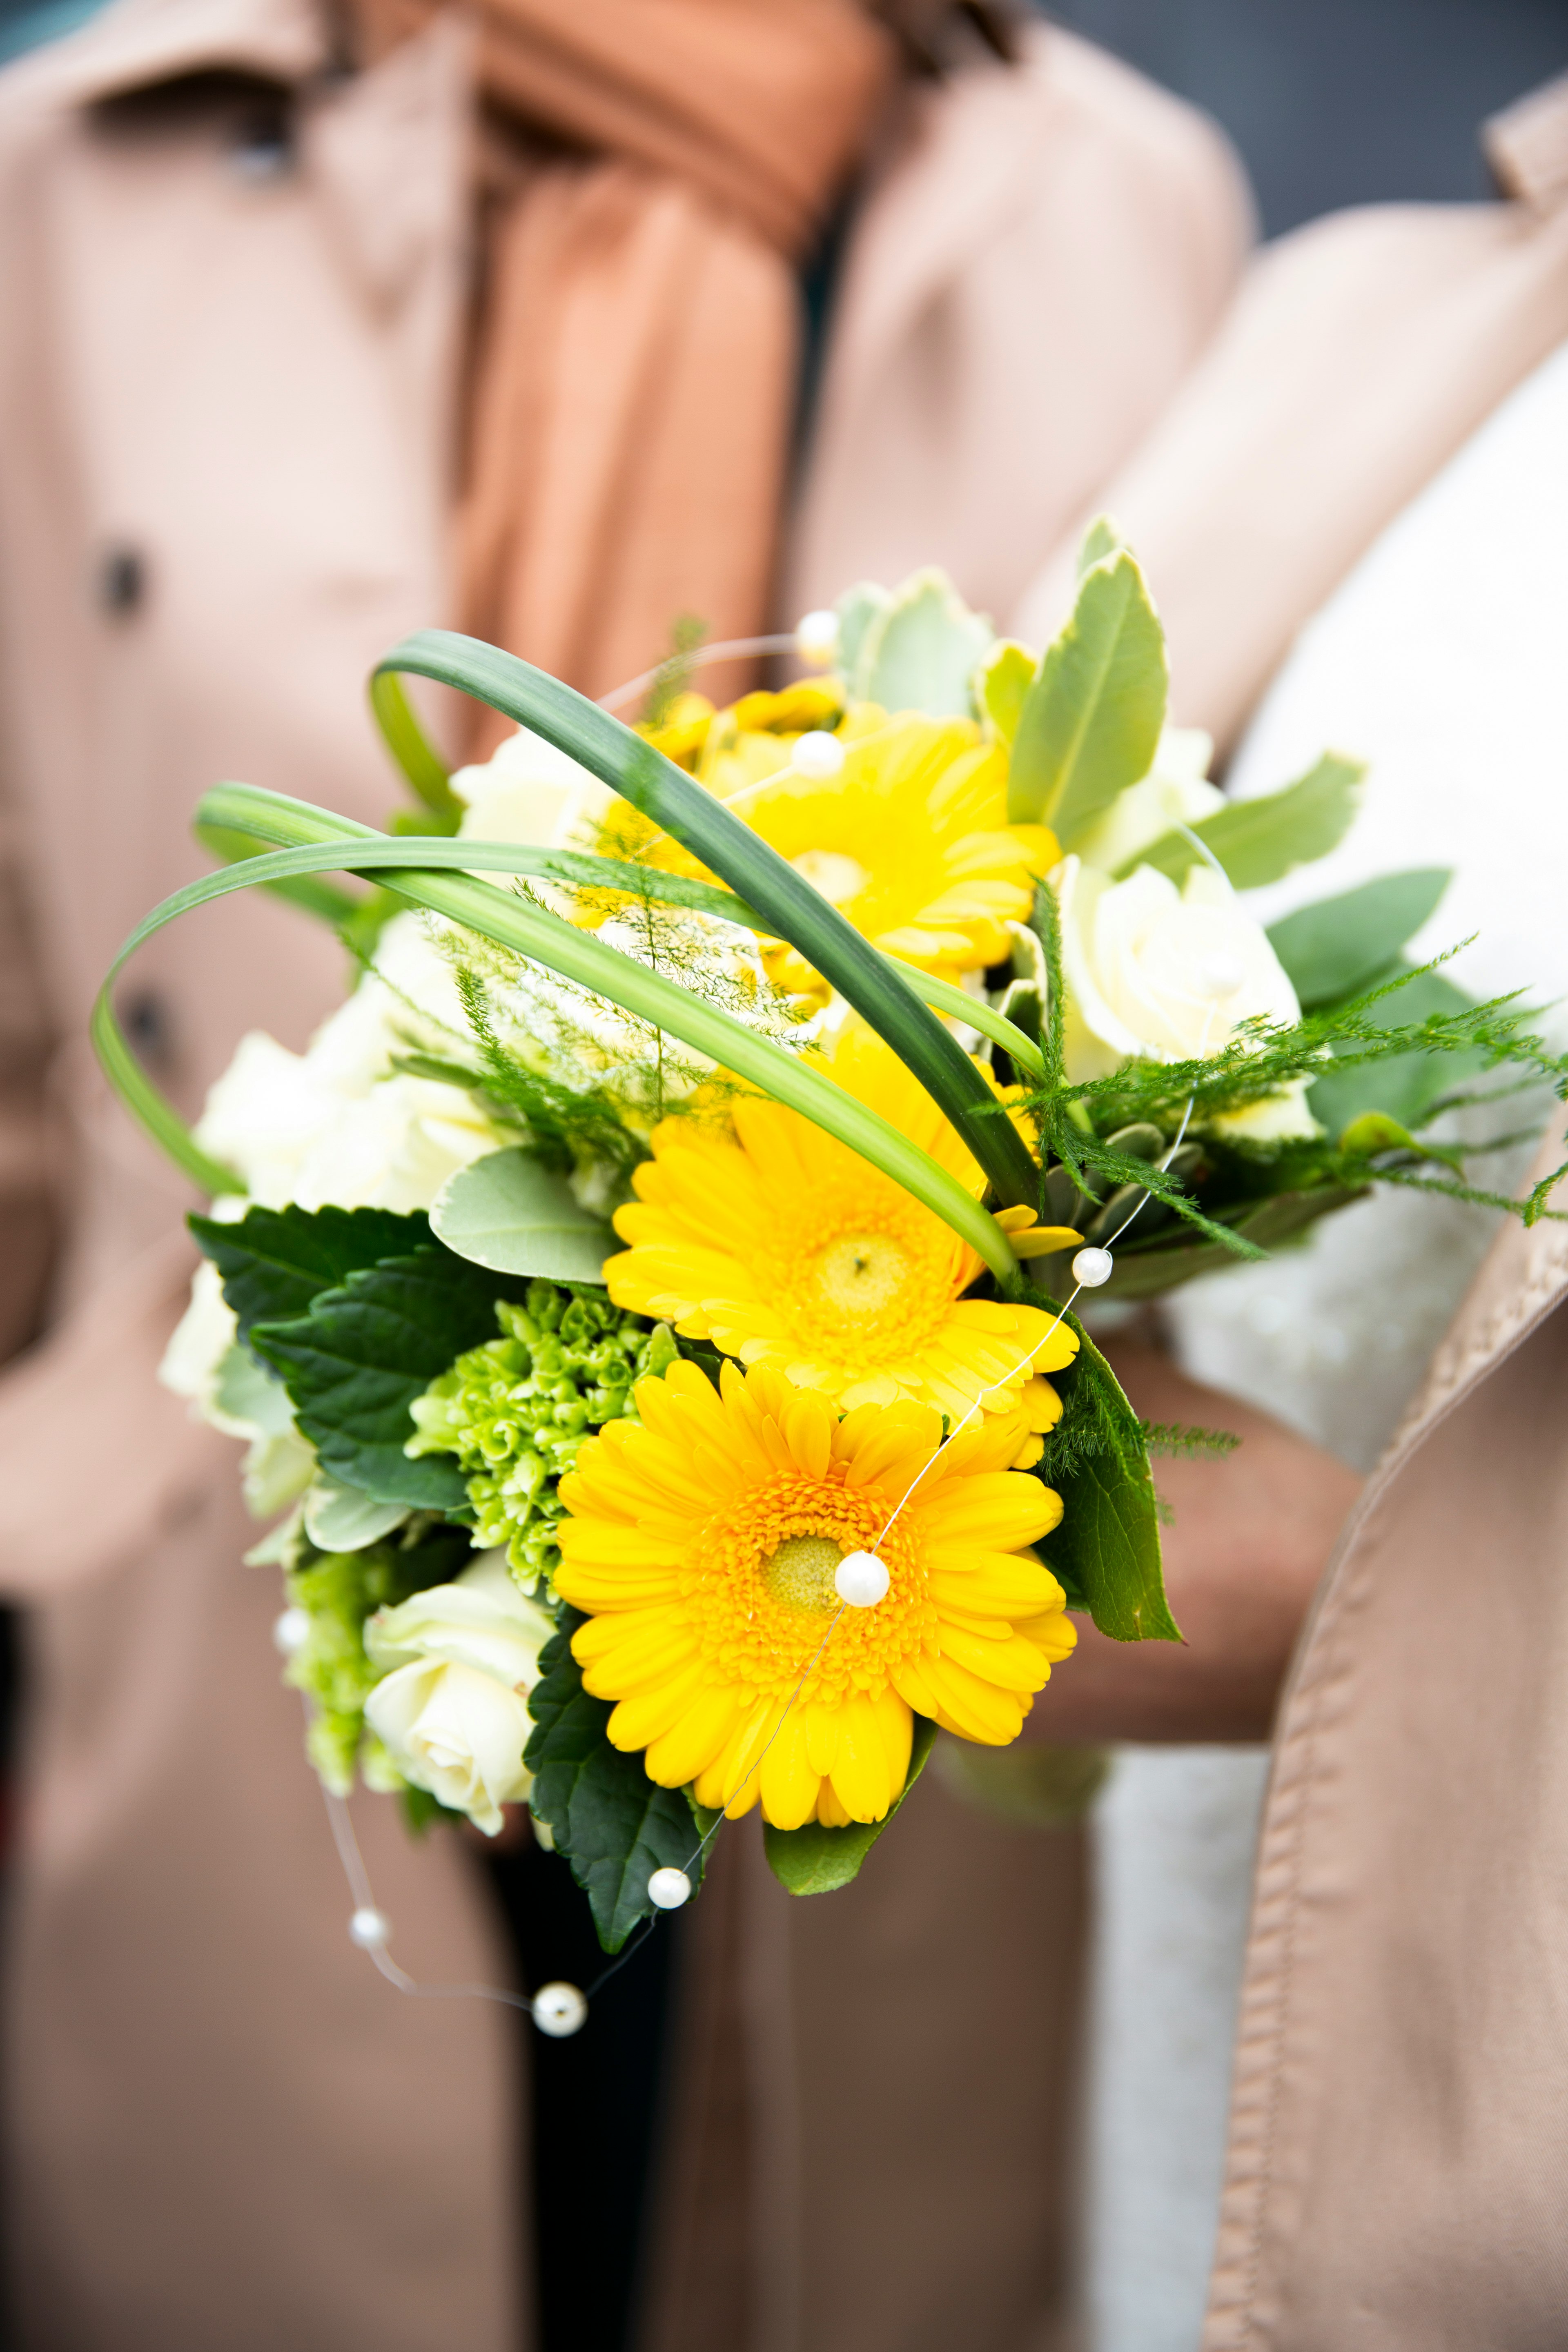 person holding yellow petaled flowers